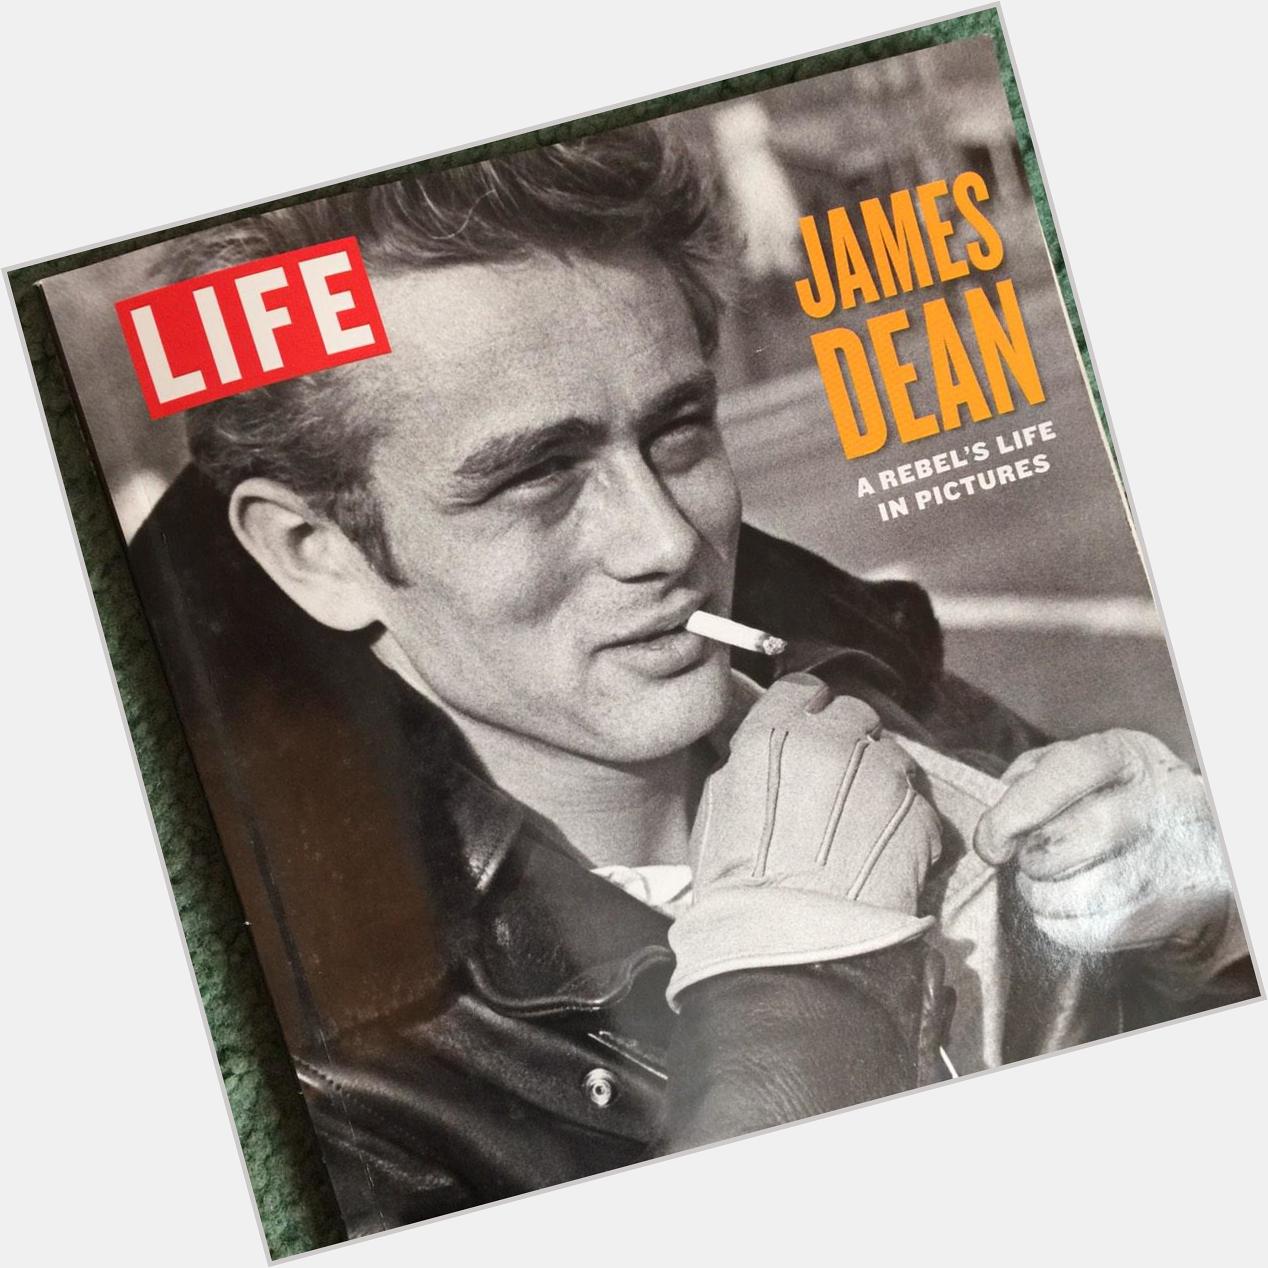 HAPPY BIRTHDAY to the rebel James Dean who would of been 84 today. February 8, 1931 - September 30, 1955 